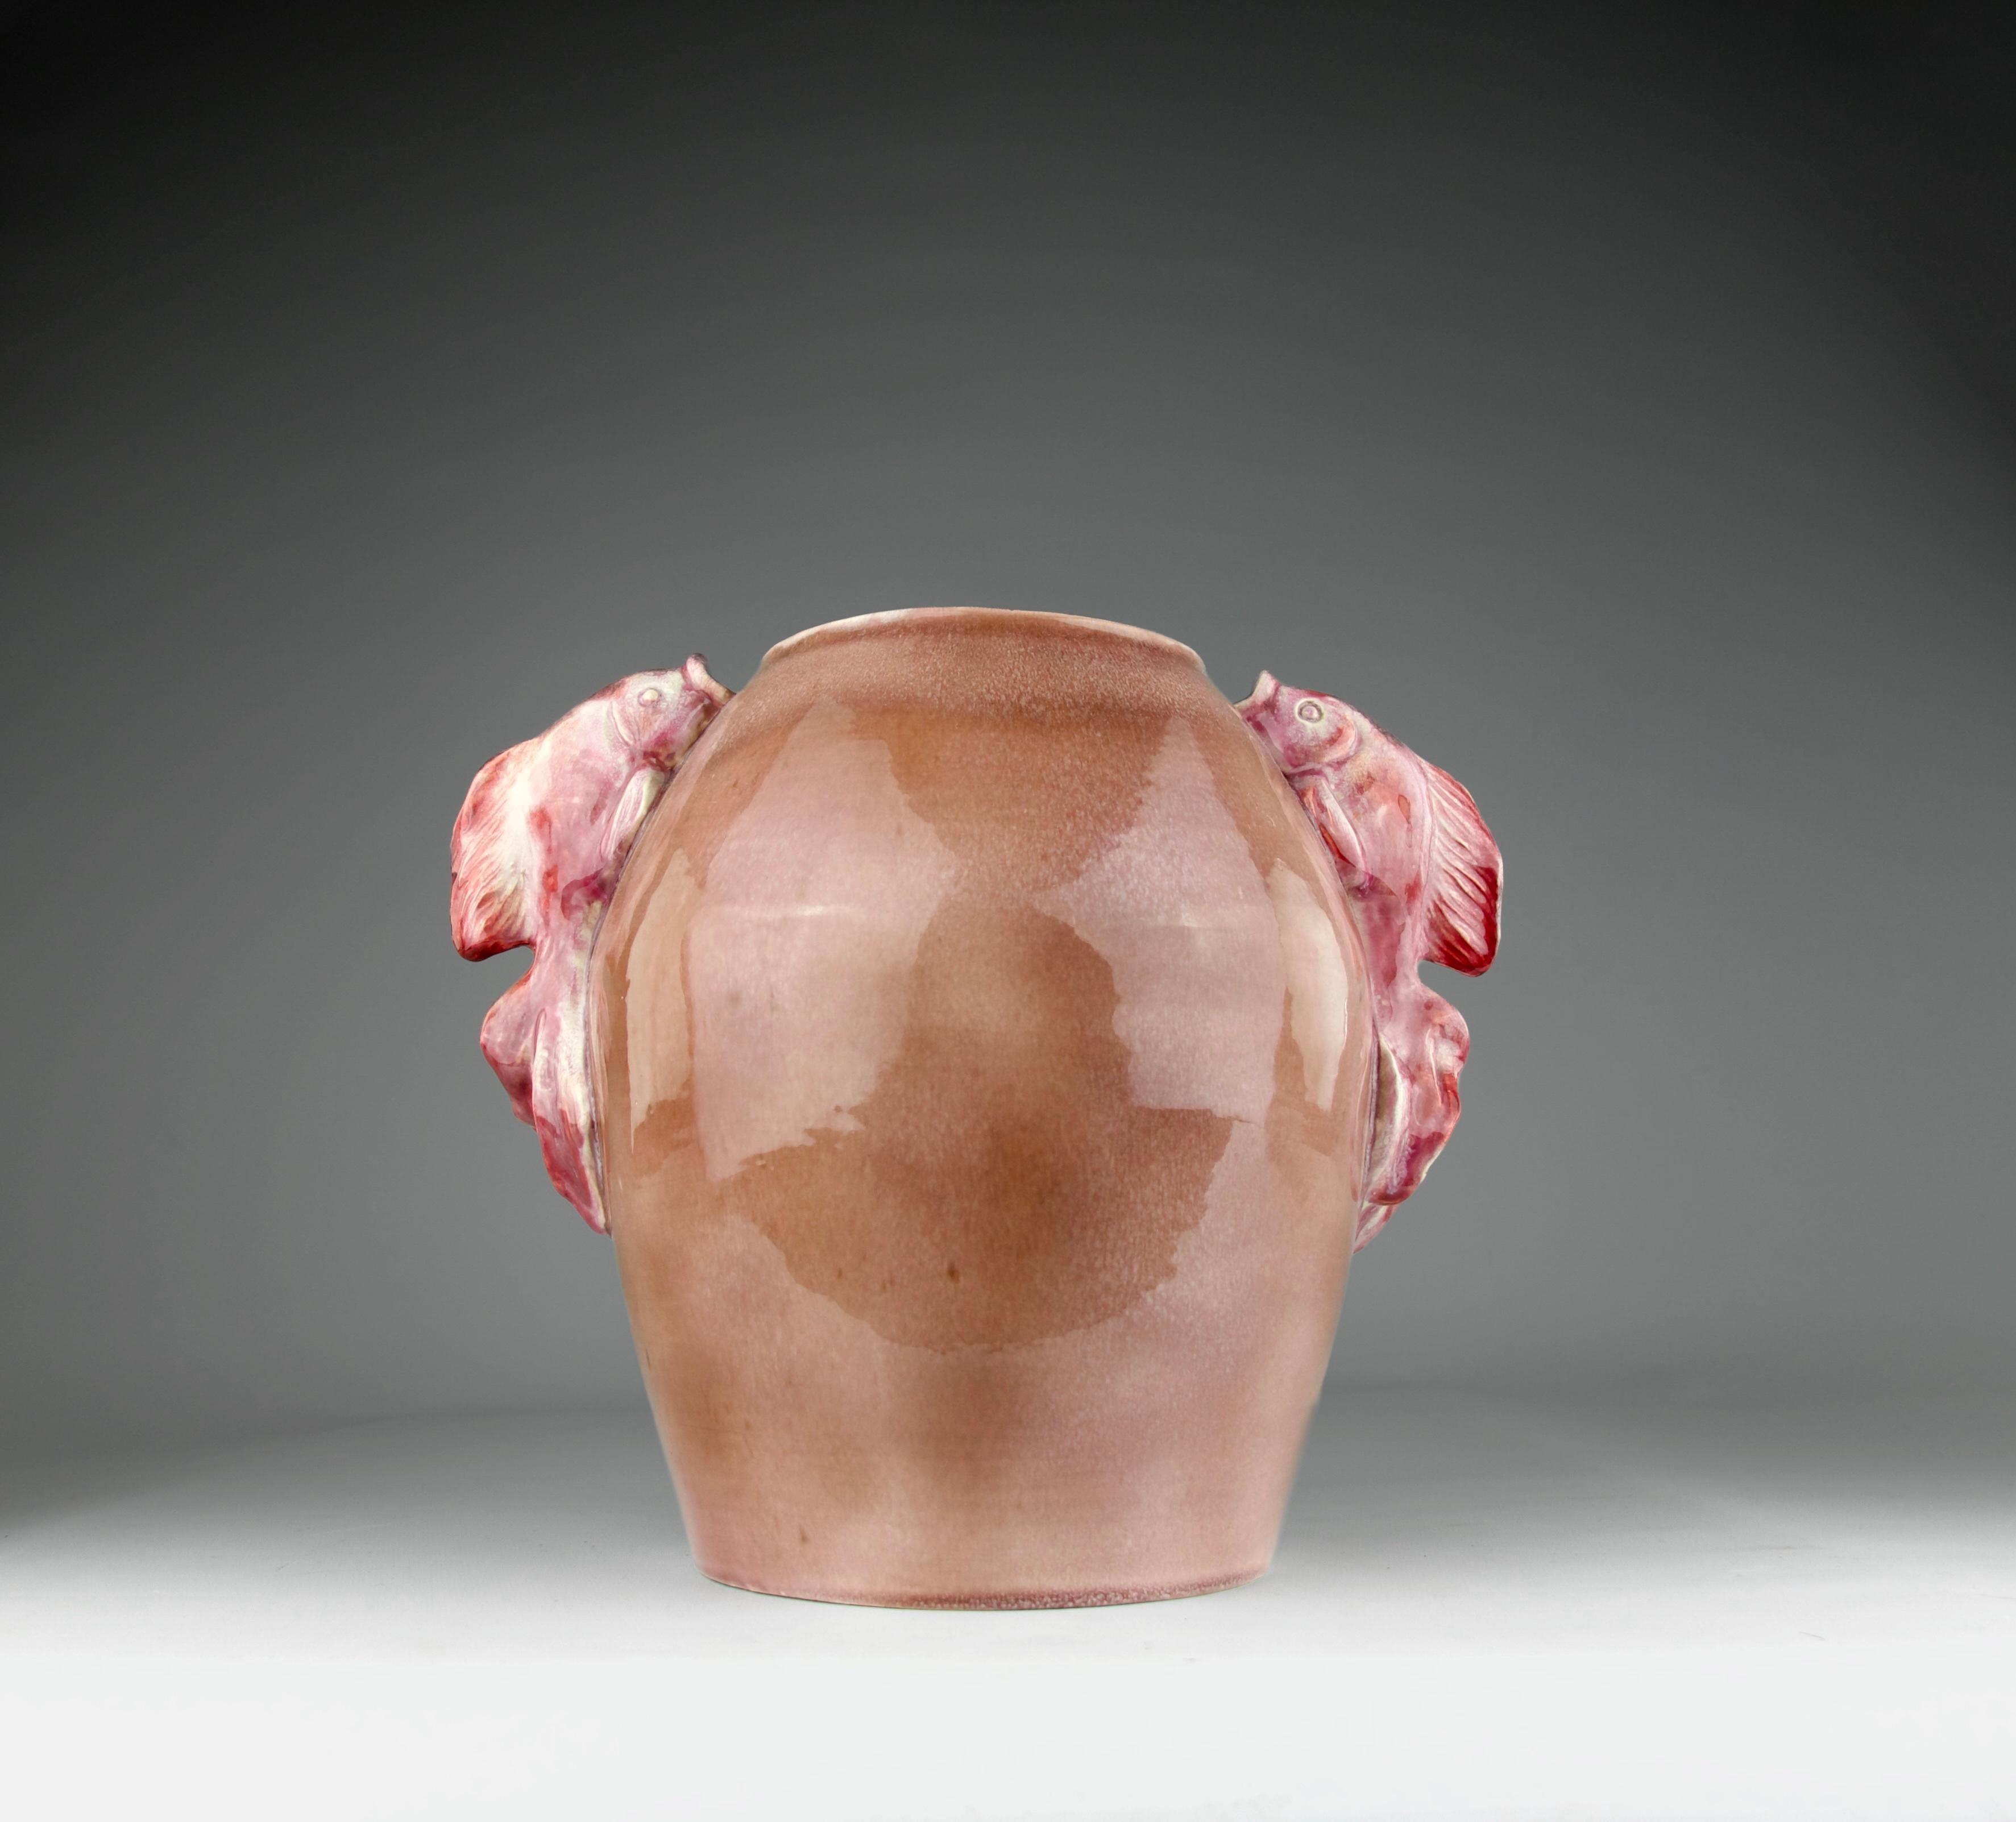 Superb and exceptional vase by P. Letessier, also a collaborator of René Meynial another Art Deco ceramicist. Vase with pink and red hues with decorations of beautiful goldfish handles.

Signed P. Letessier and numbered 1011.

Dimensions in cm (